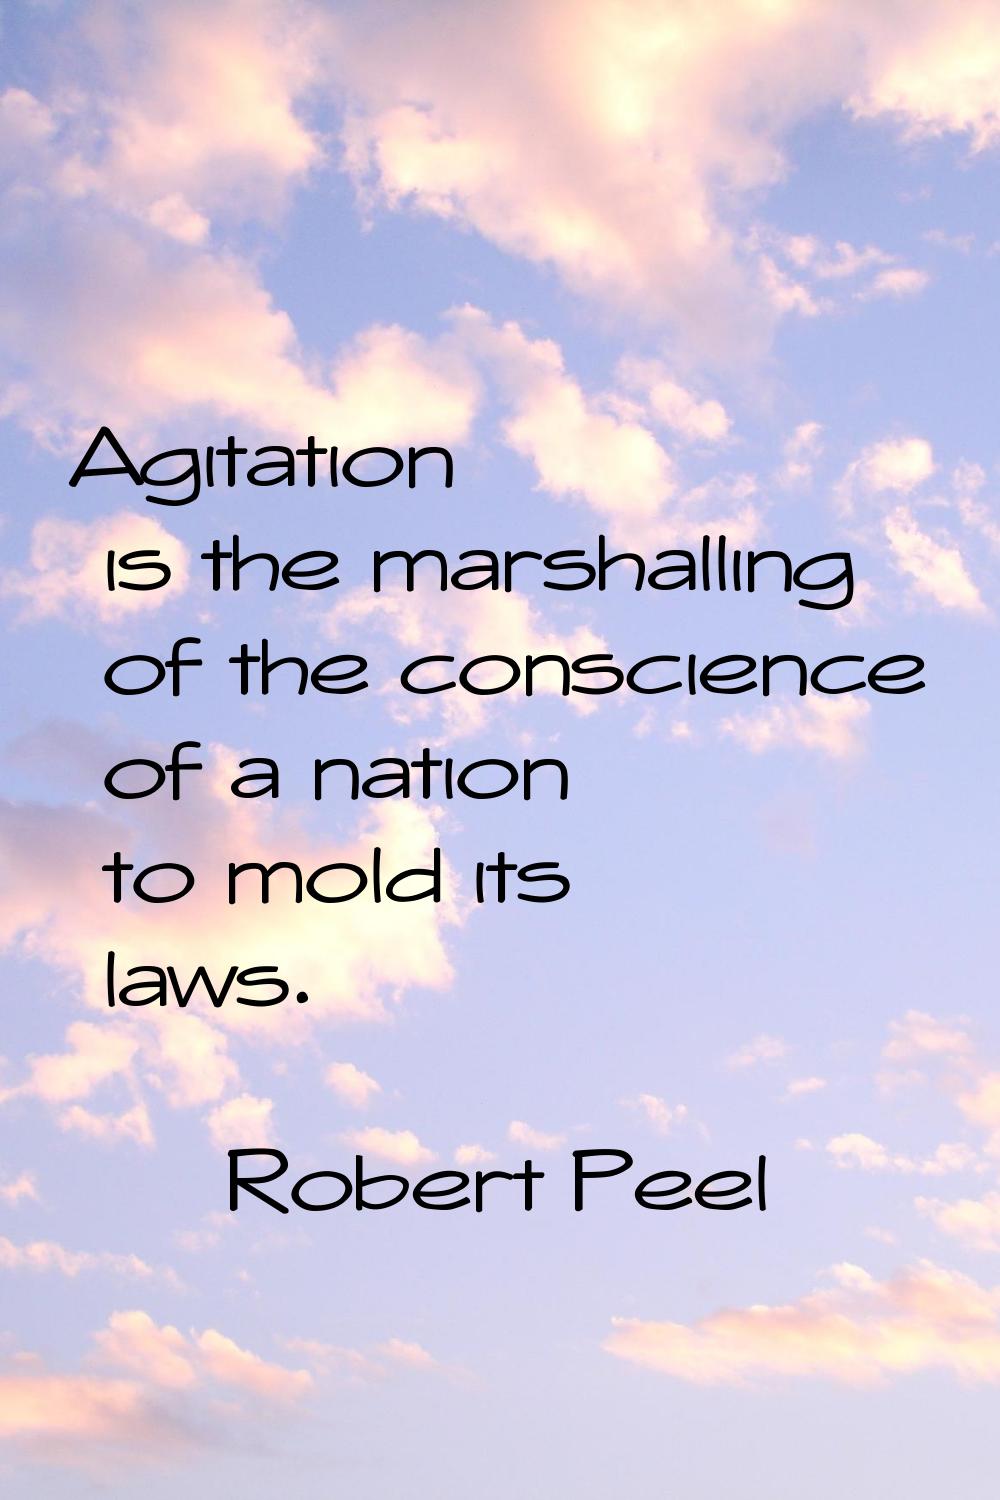 Agitation is the marshalling of the conscience of a nation to mold its laws.